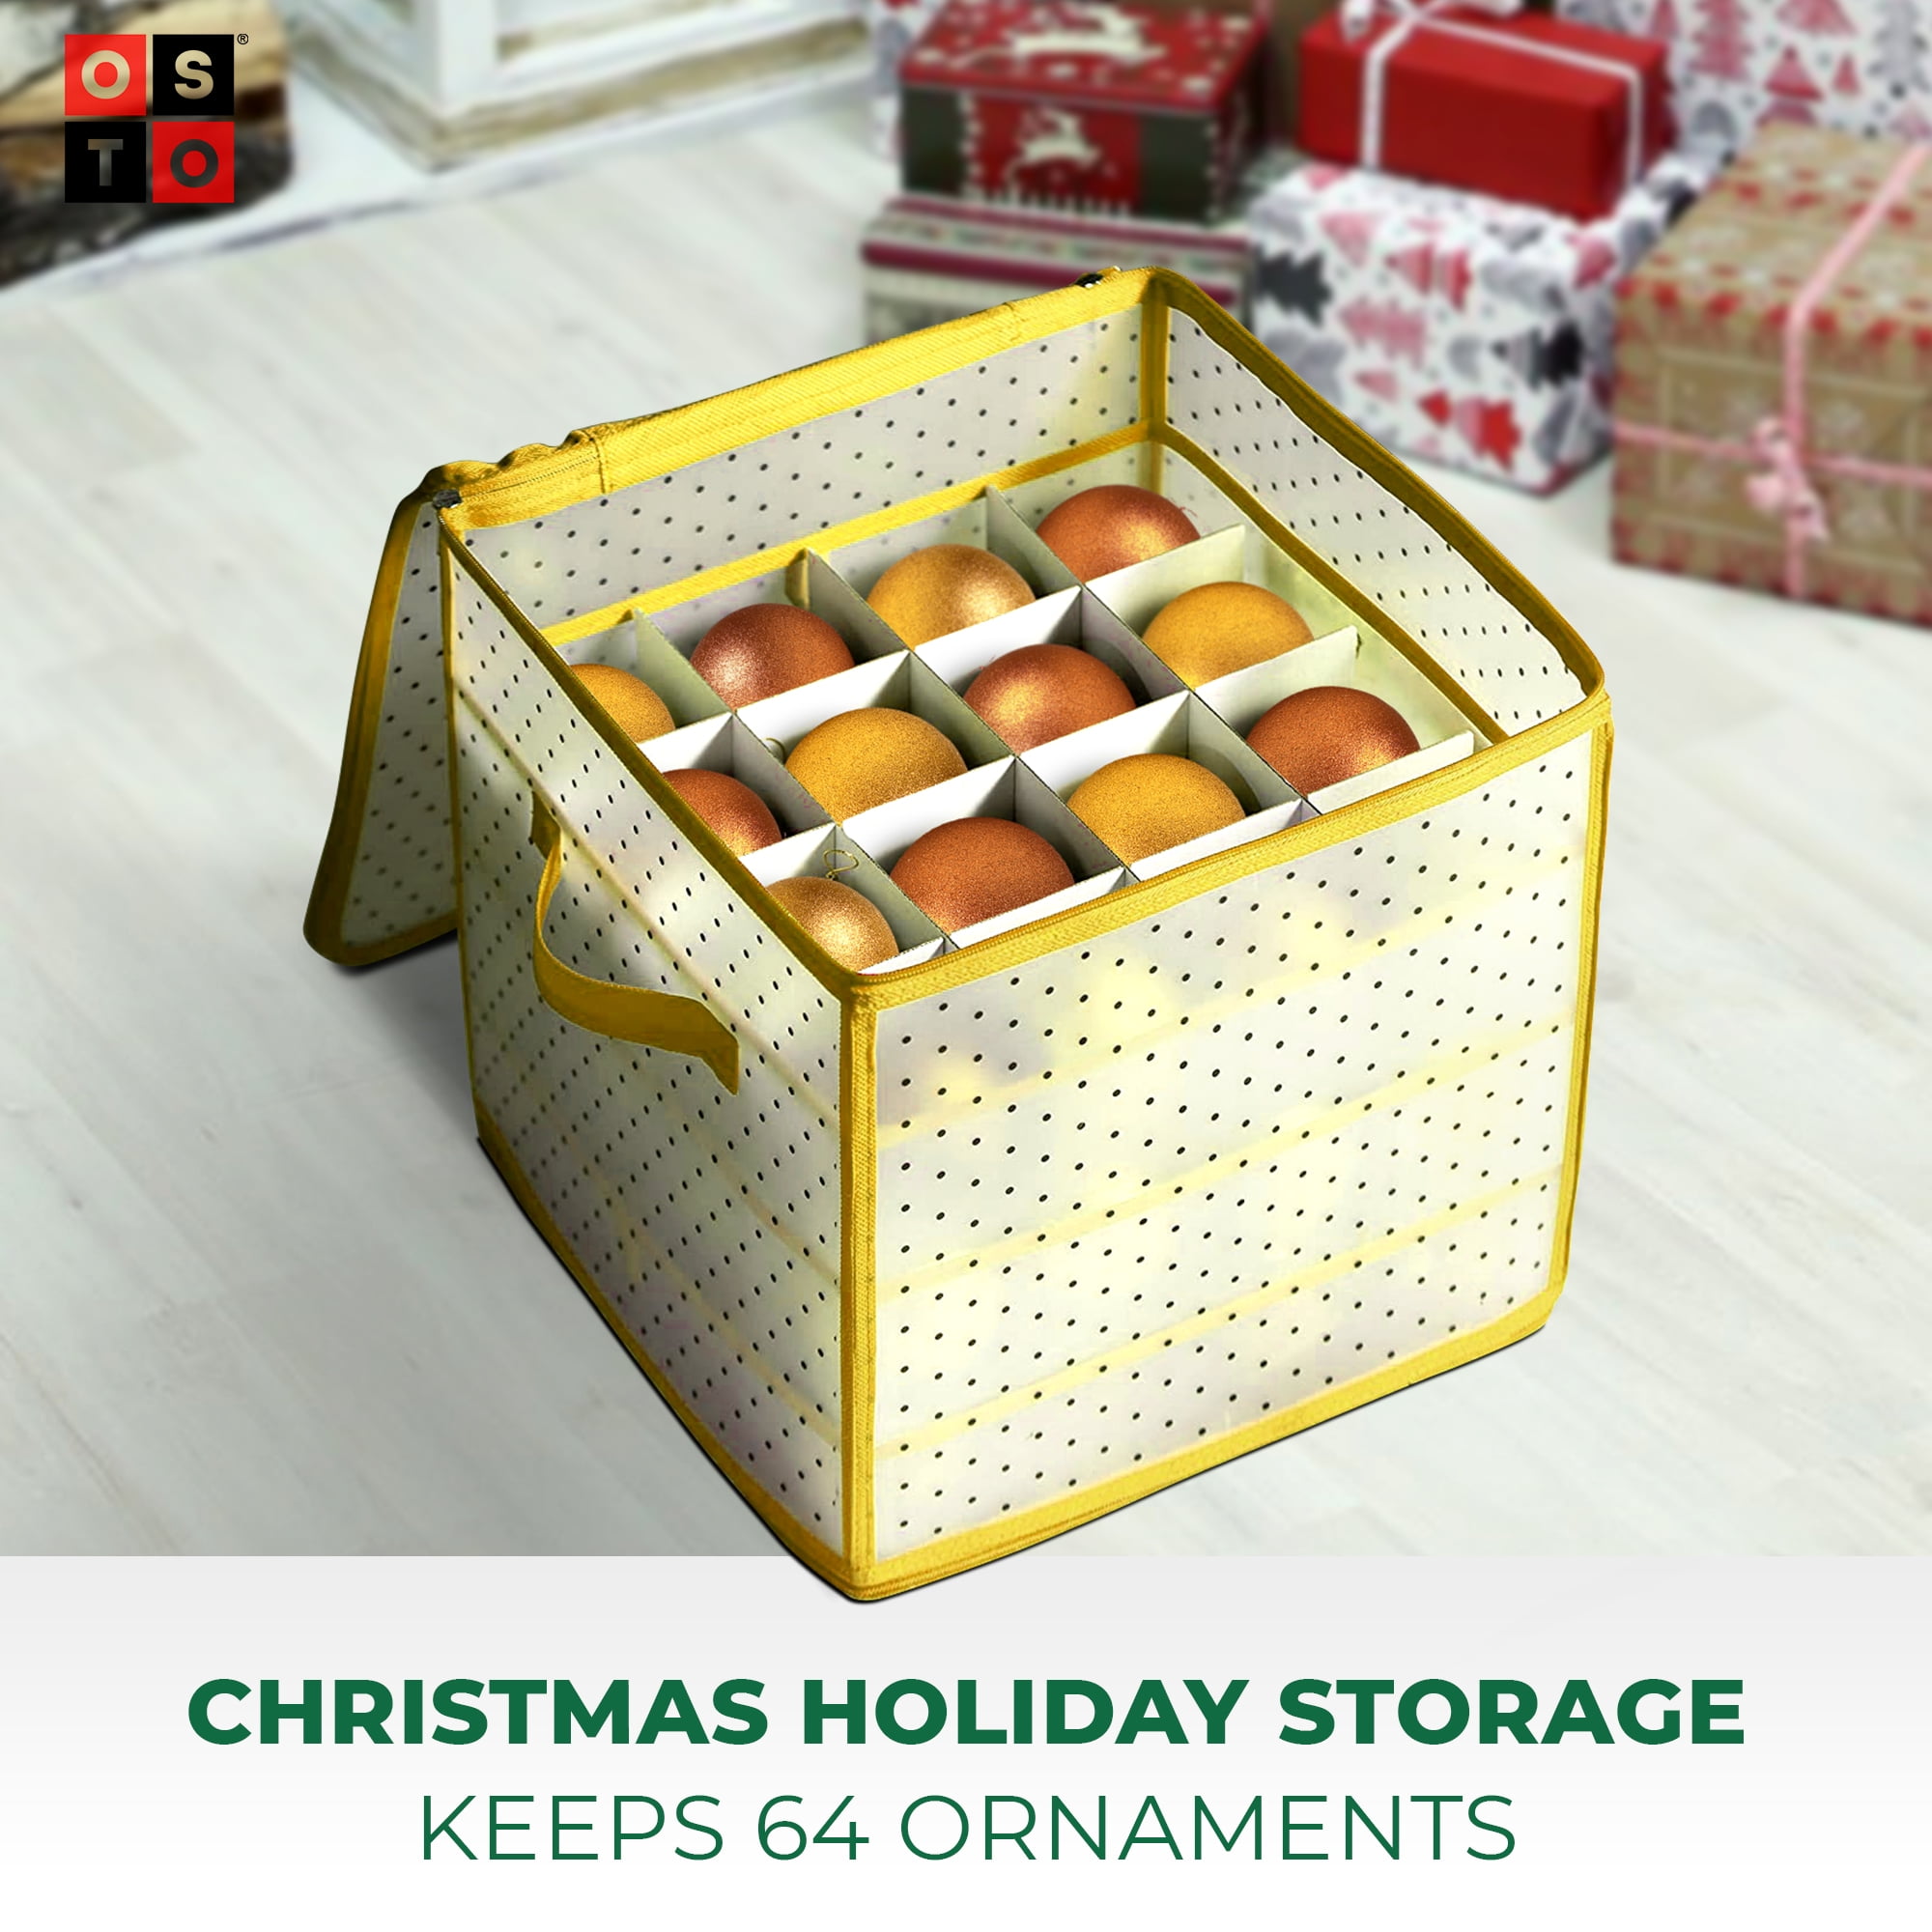  Christmas Ornament Storage Box, Plastic Xmas Holiday Ornament  Storage Container with Dividers, Zippered Closure, Holds up to 64 Ornaments  Balls : Home & Kitchen